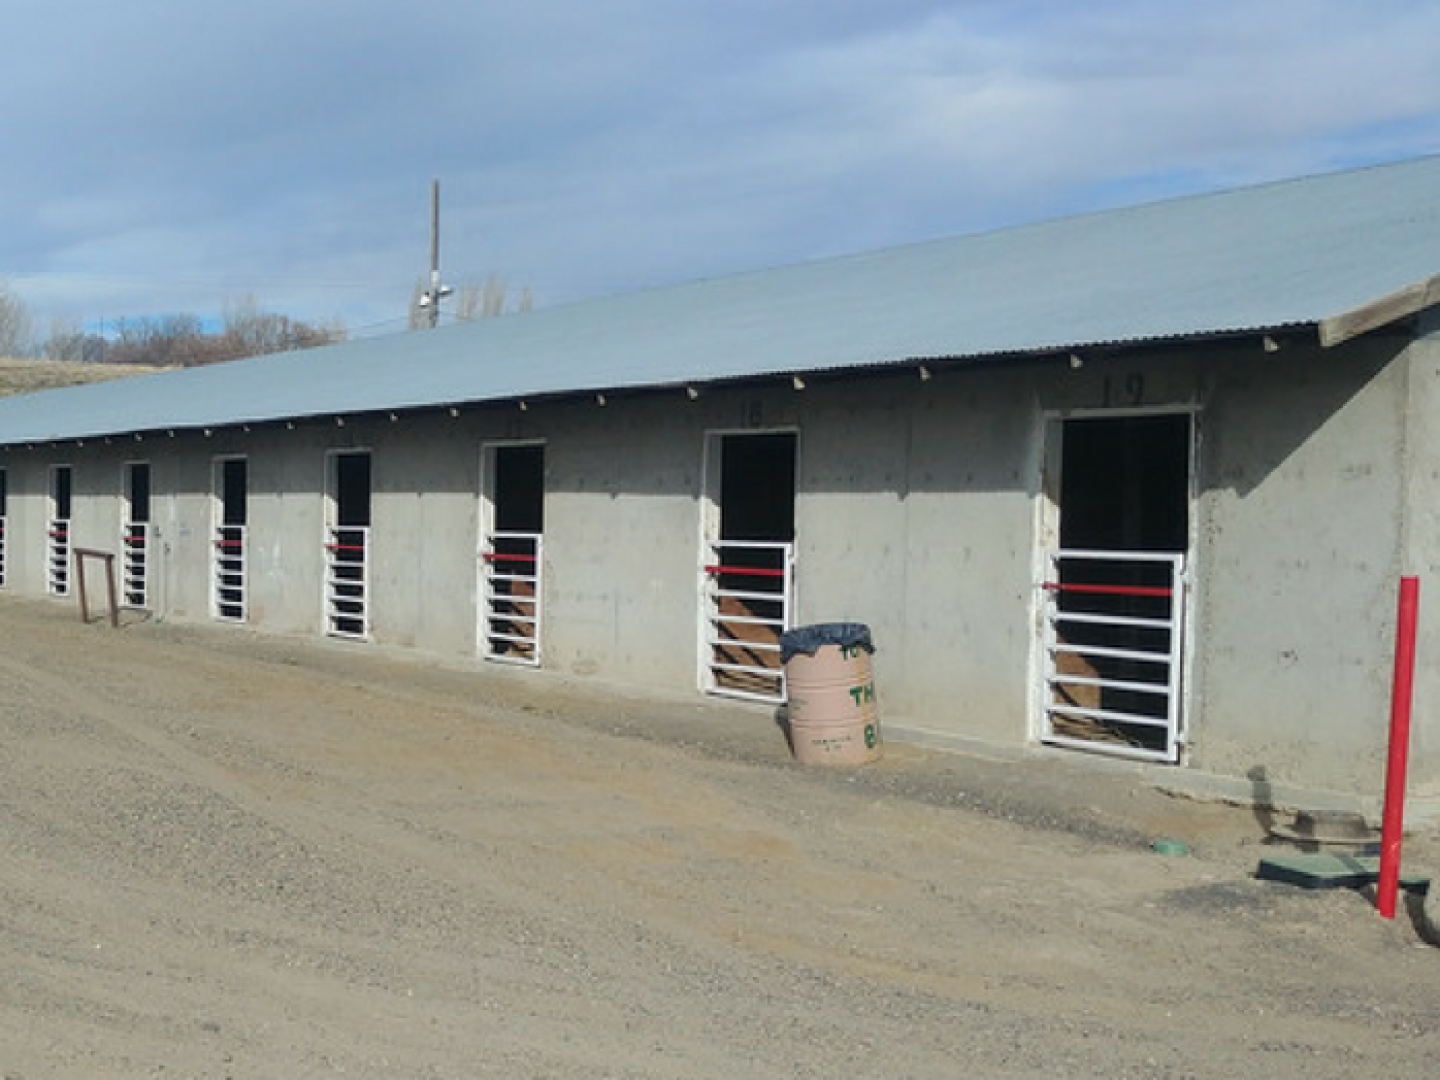 Horse Stalls at Fair and Rodeo